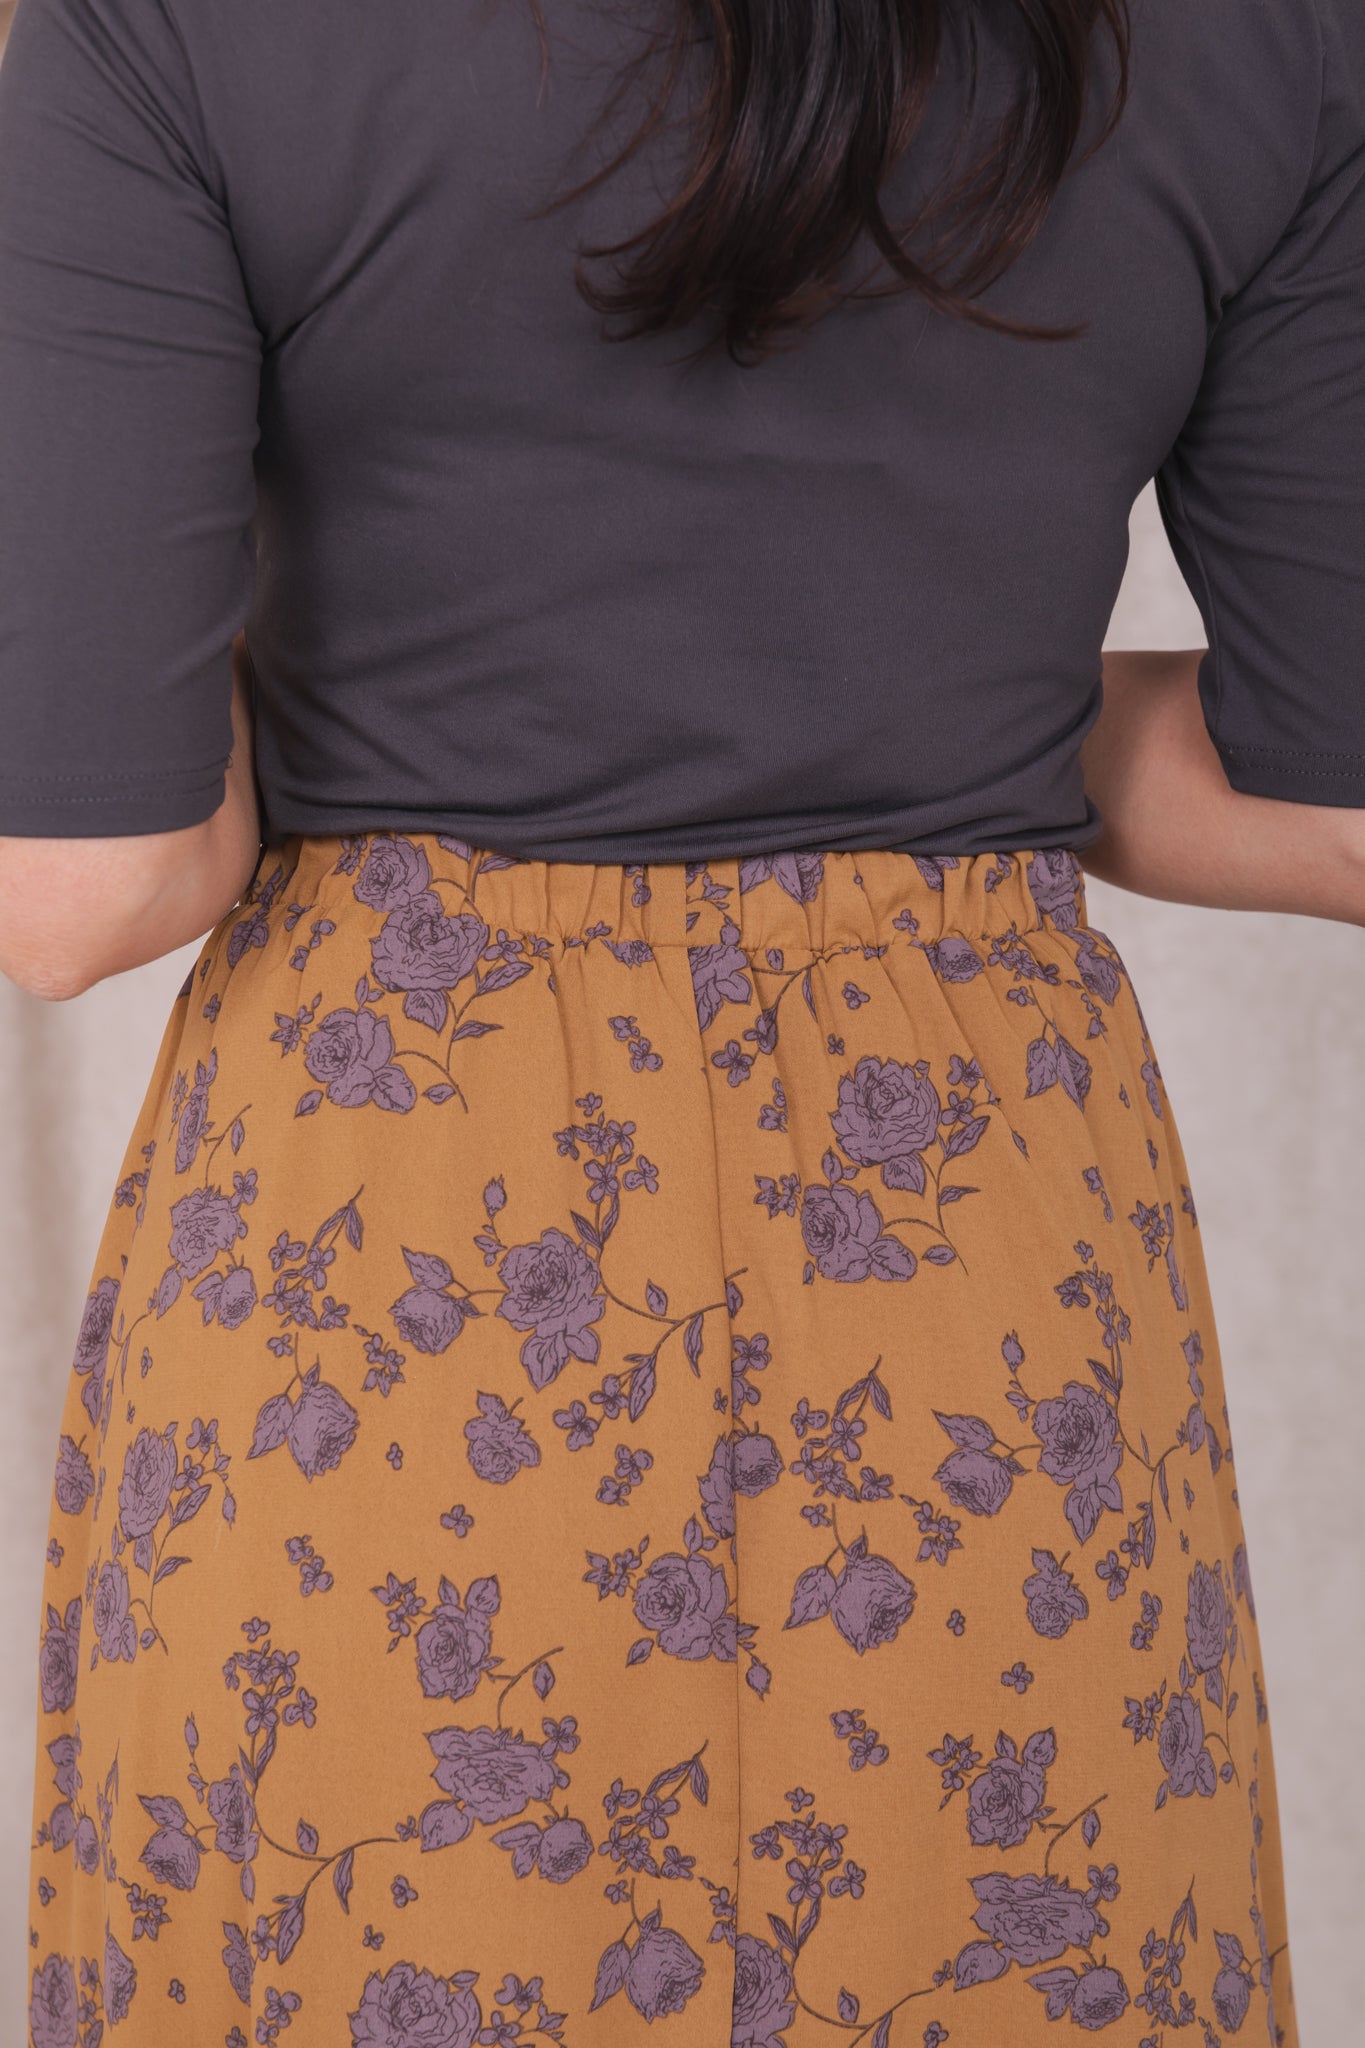 MAXI SKIRT IN GOLD COMBO ROSES FINAL SALE